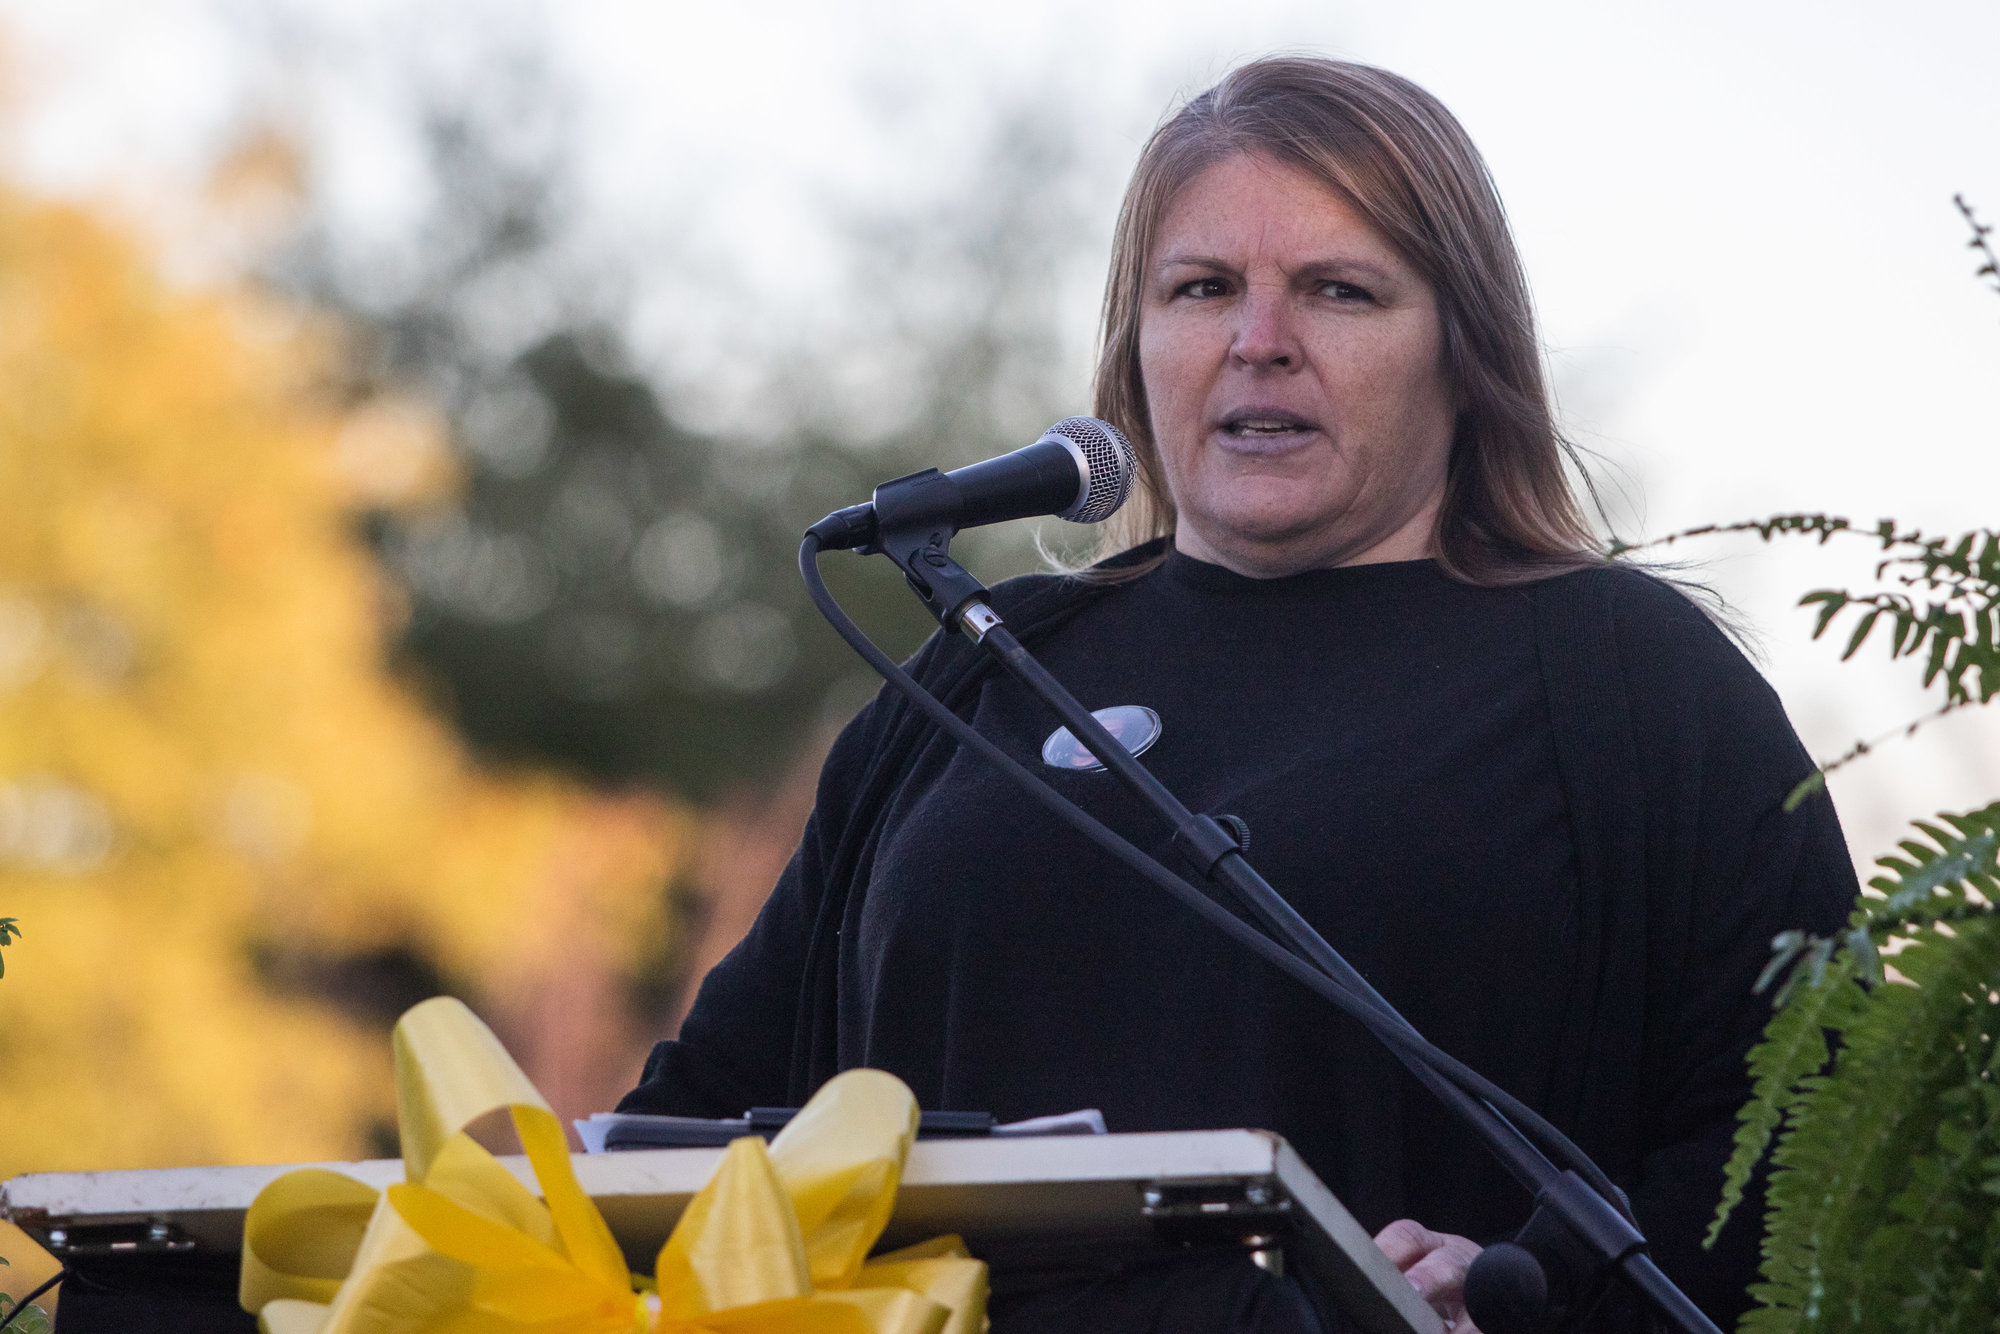 Angel Brown speaks at the podium during the Sumter's Missing memorial service on Nov. 13, 2022.